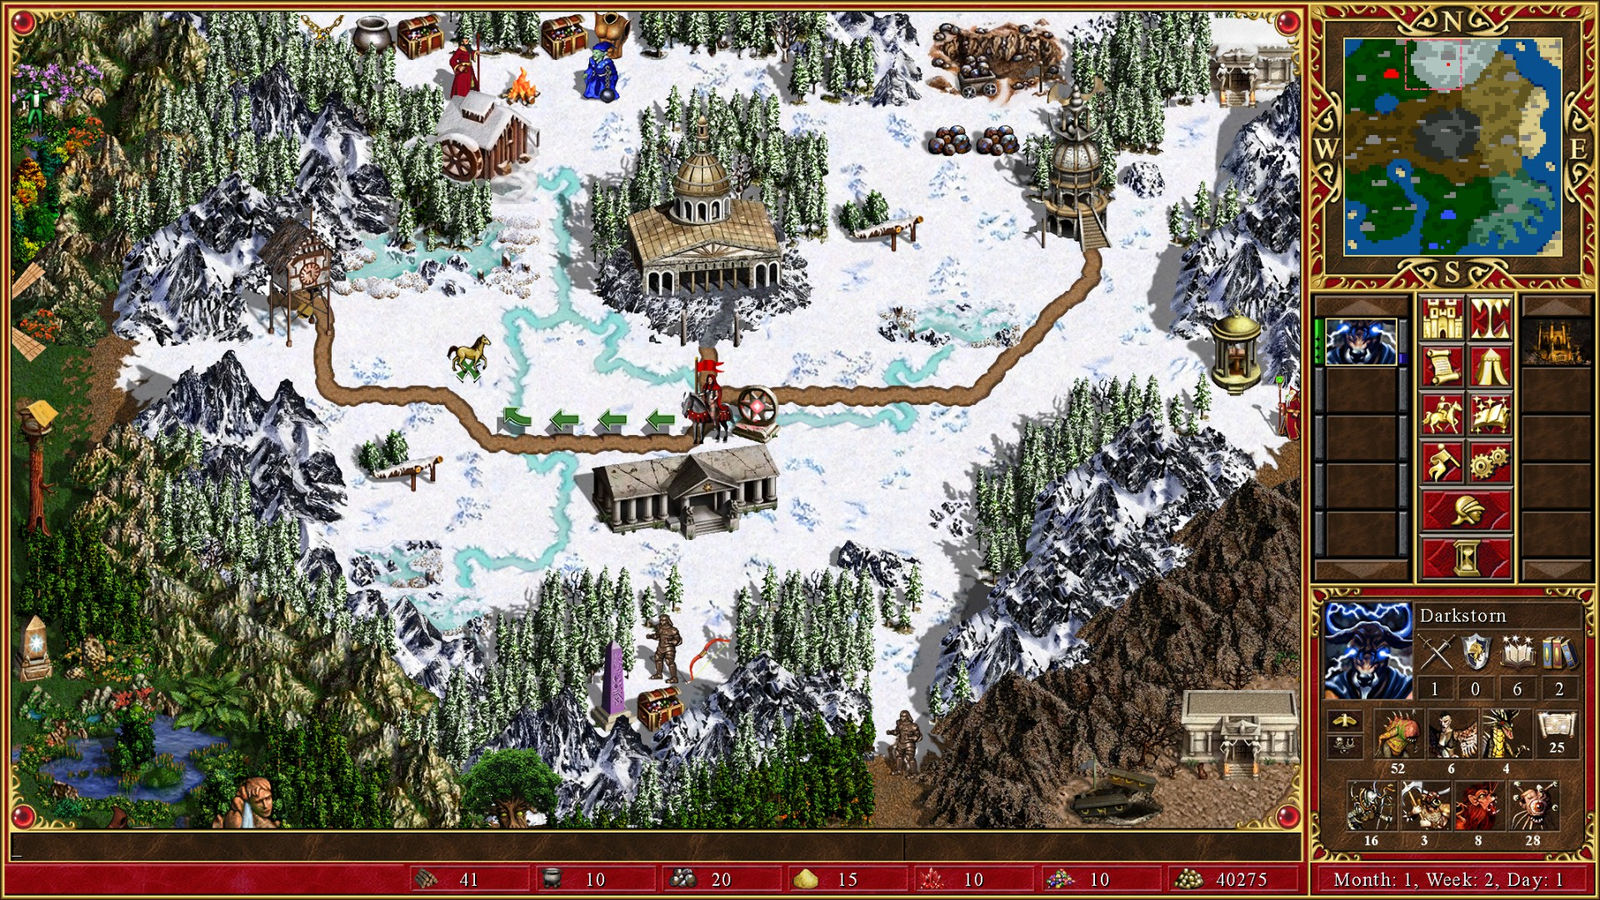 download heroes of might and magic 3 online emulator